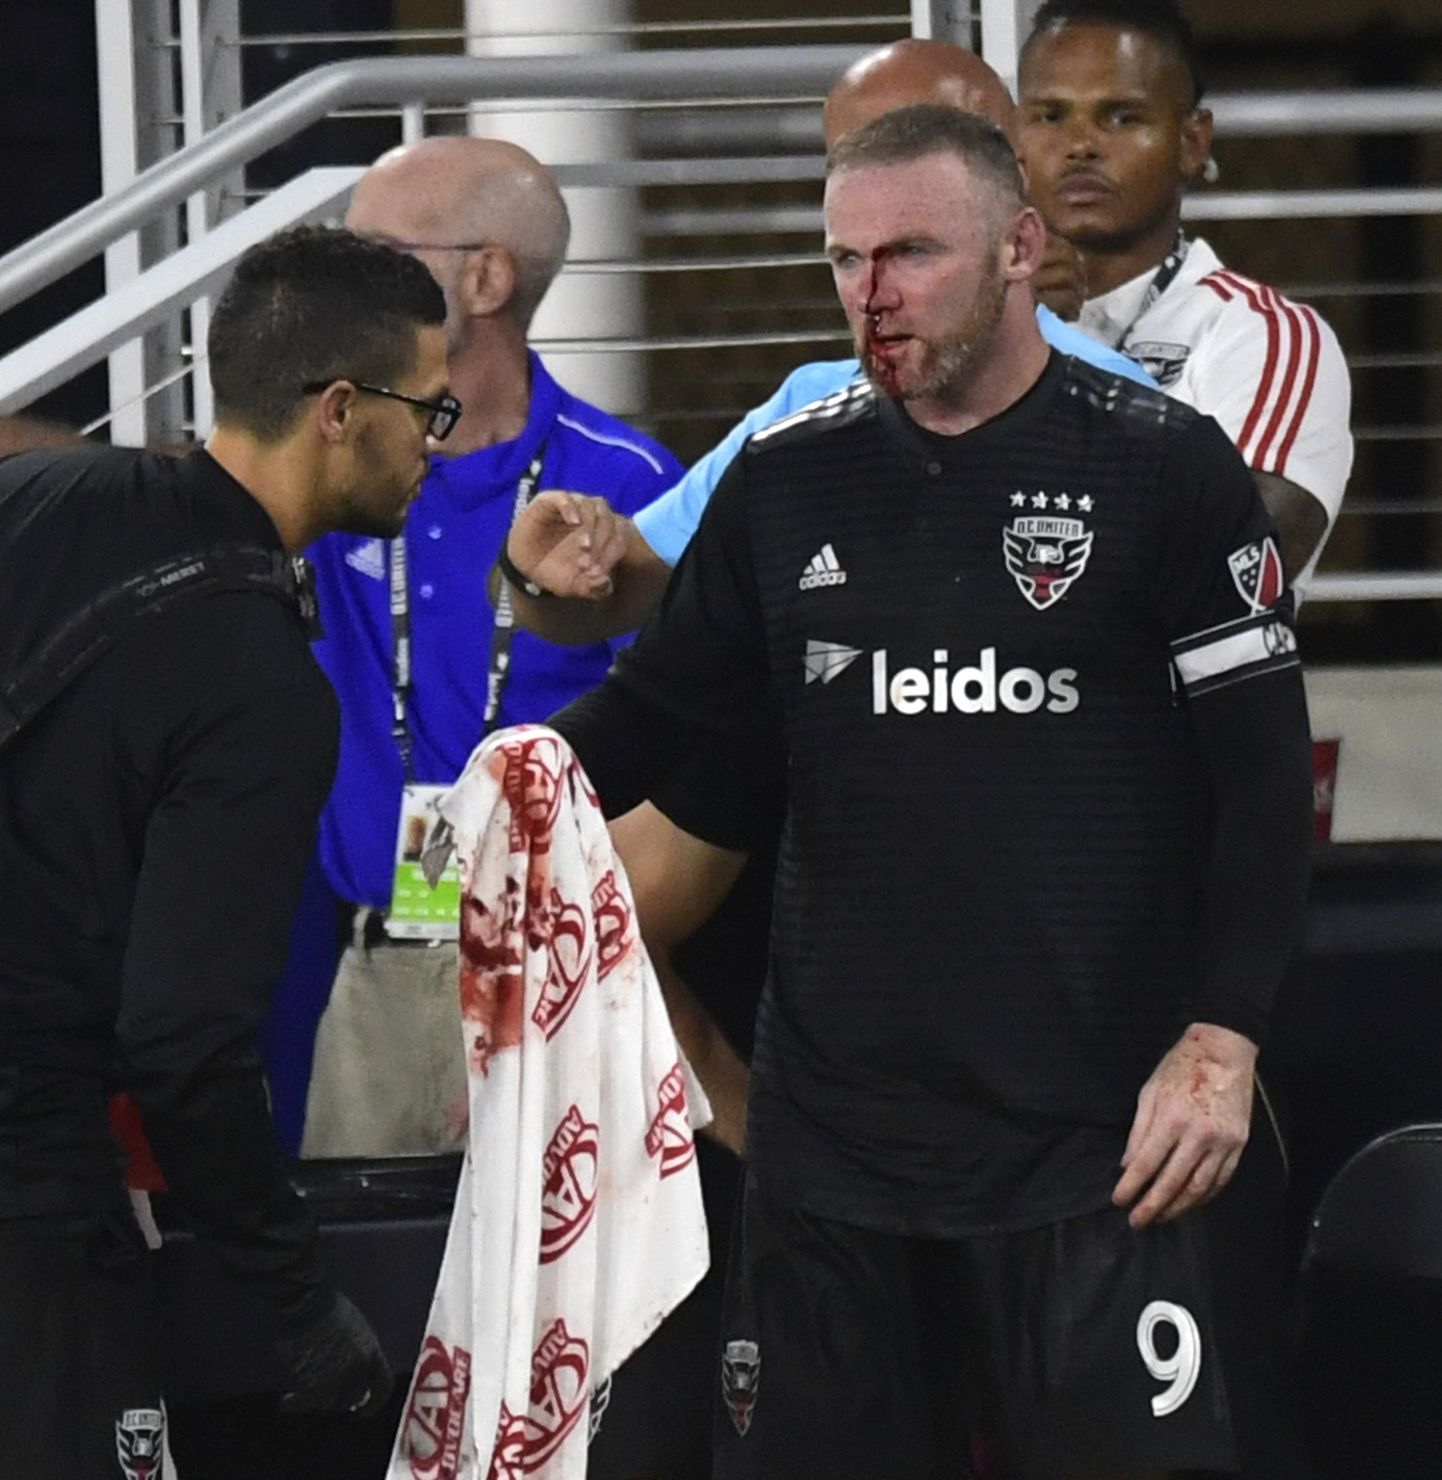 D.C. United forward Wayne Rooney is assisted on the sideline after getting injured during the second half of an MLS soccer match against the Colorado Rapids in Washington, Saturday, July 28, 2018. (AP Photo/Susan Walsh)